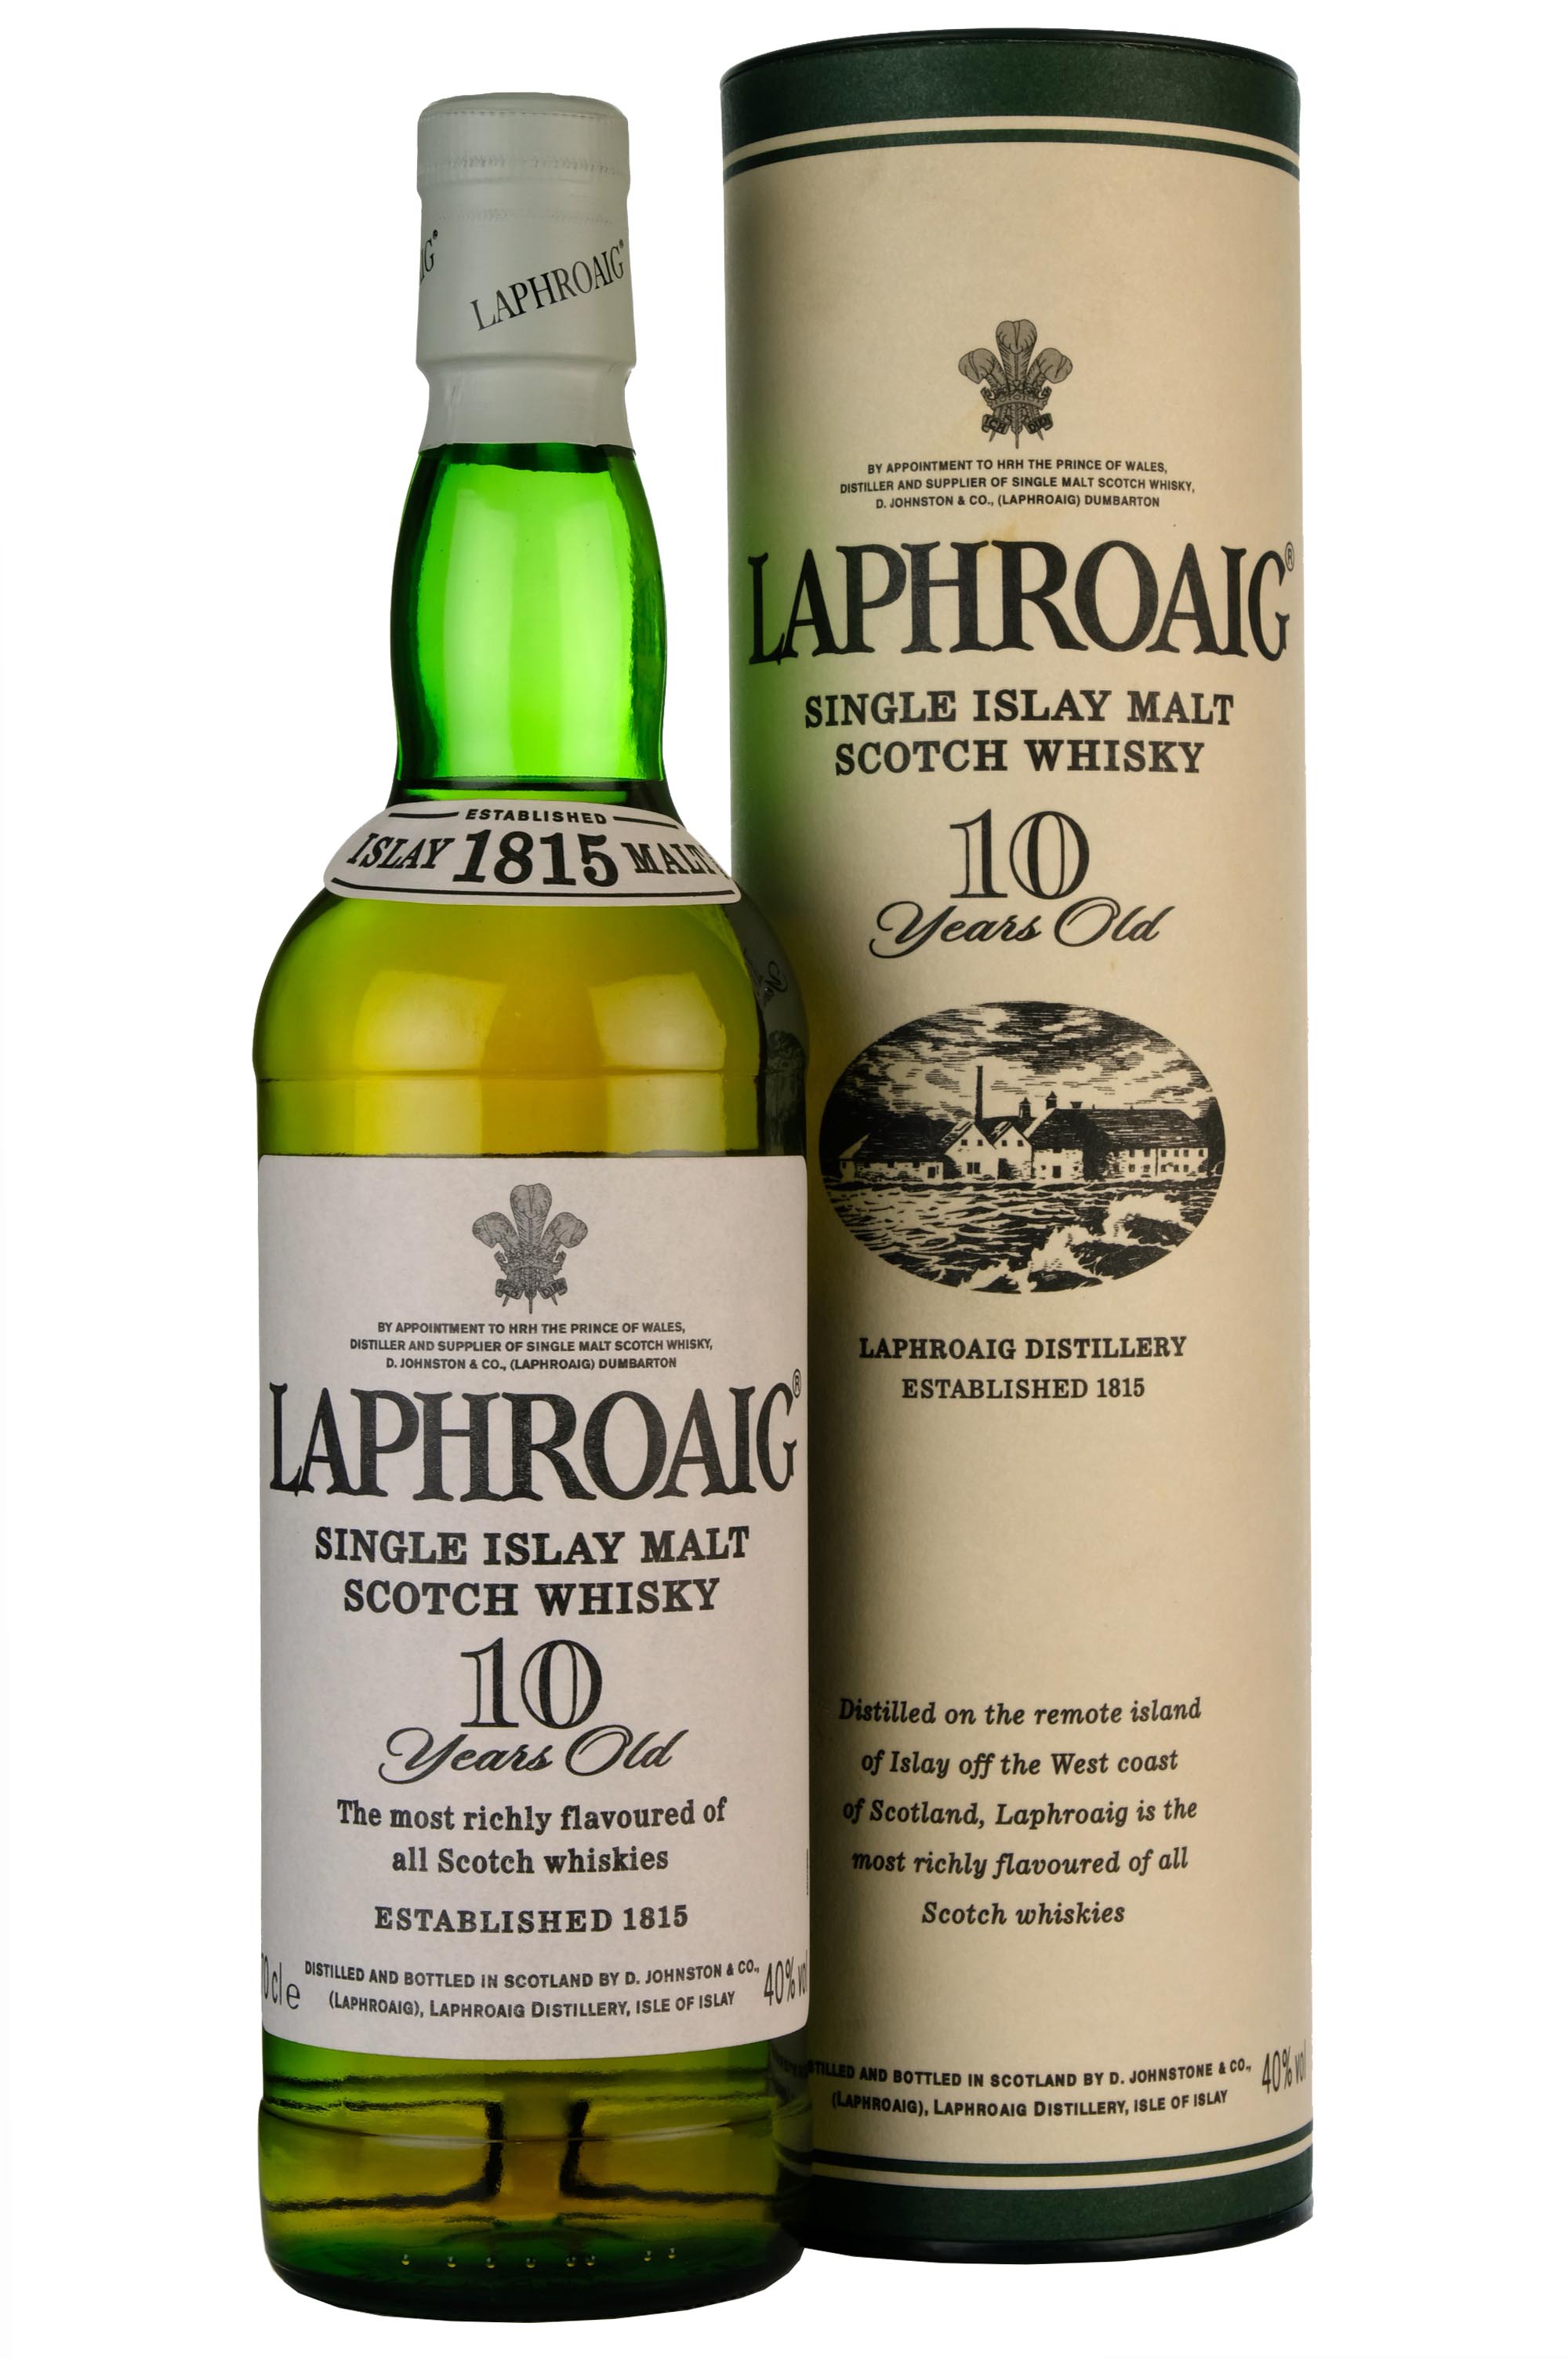 Laphroaig 10 Year Old Early 2000s